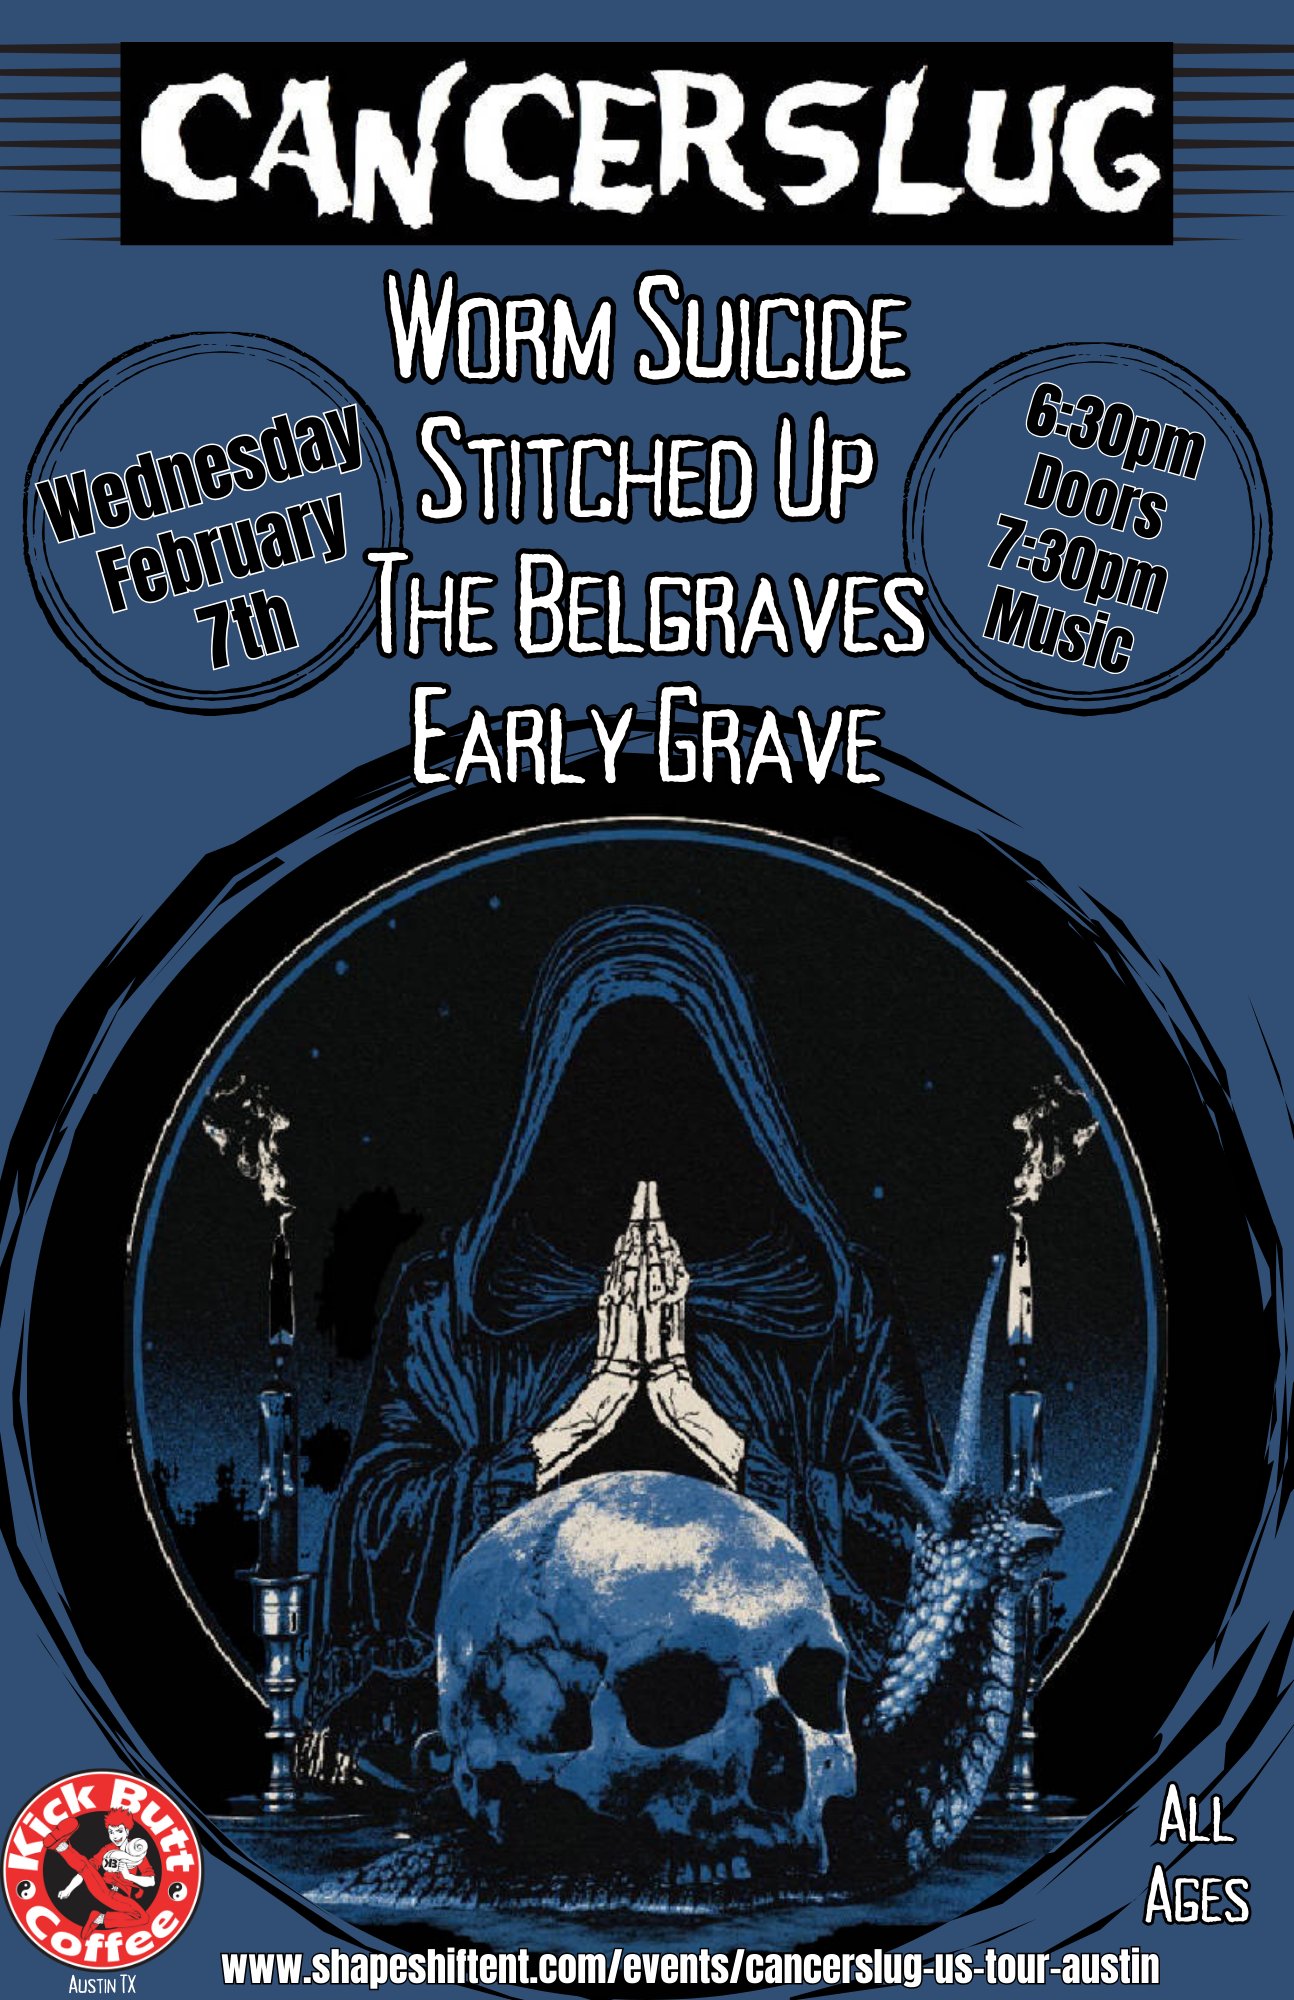 Cancerslug Tour w Worm Suicide, Stitched Up, The Belgraves, Early Grave